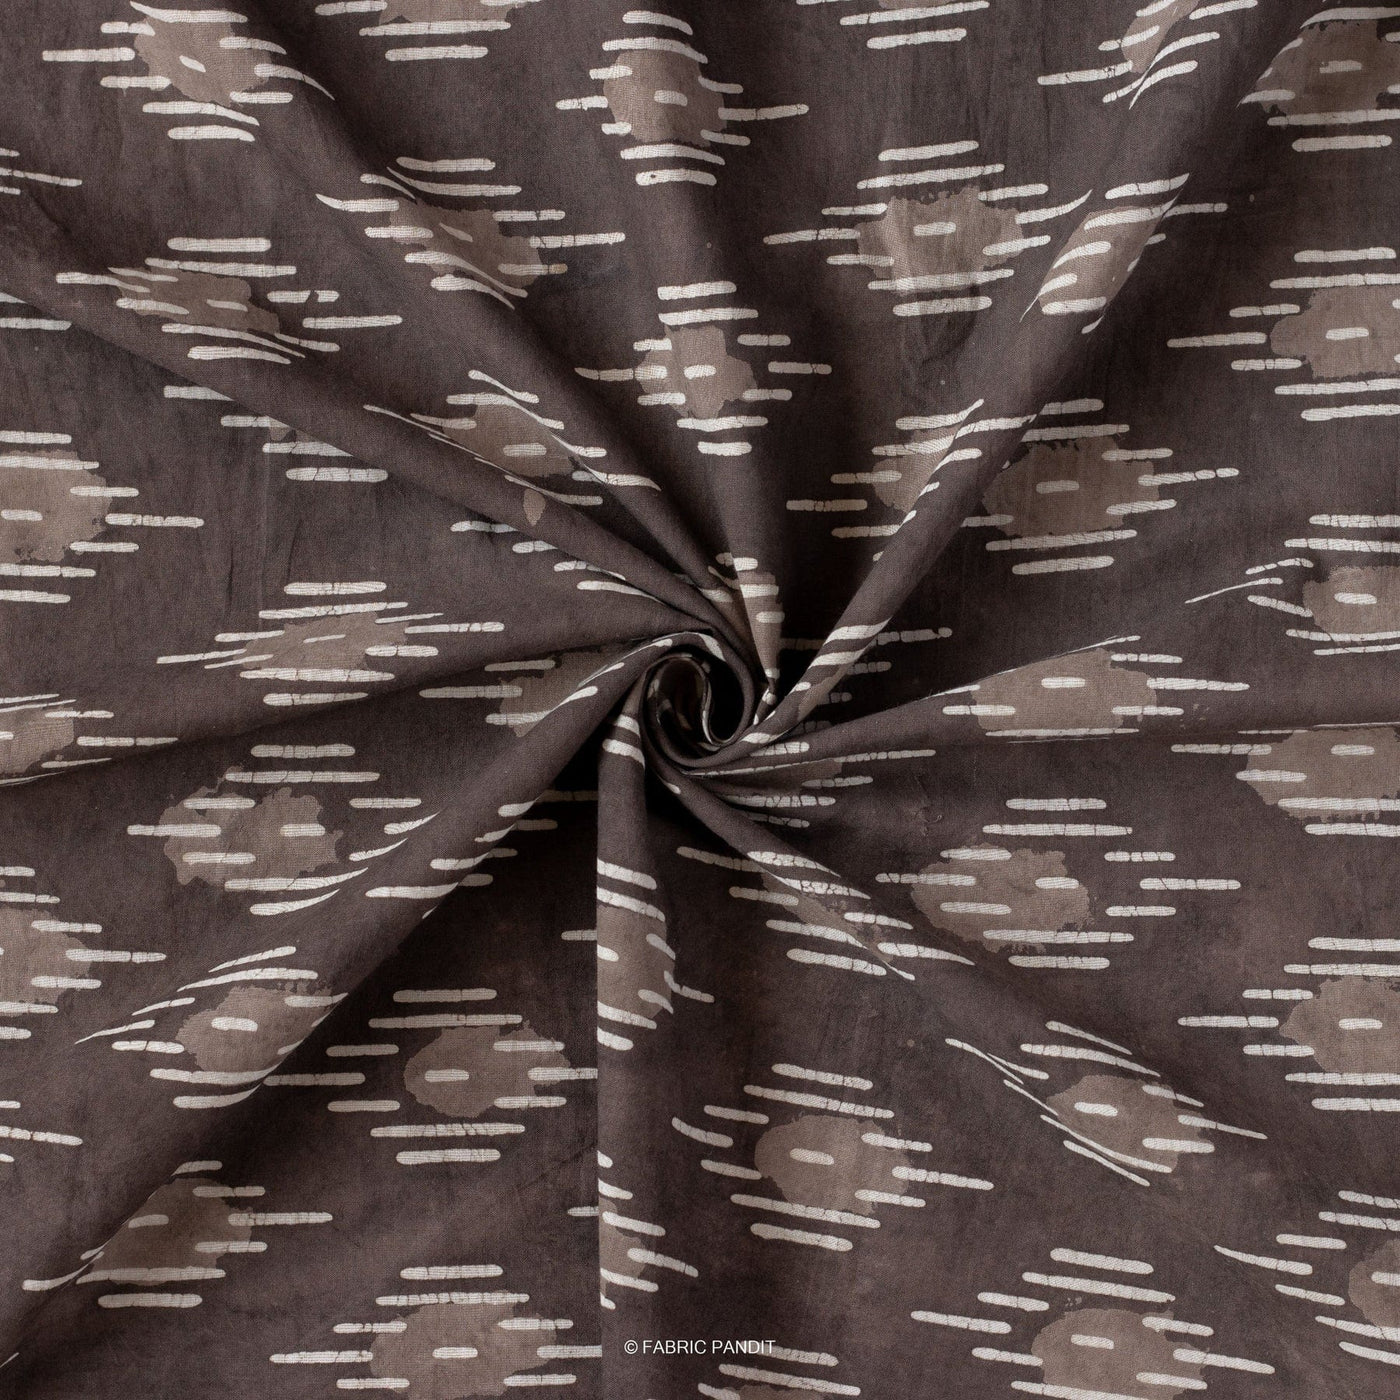 Fabric Pandit Fabric Brown Indigo Dabu Natural Dyed Geometrical Abstract Printed Pure Cotton Fabric (Width 44 Inches)